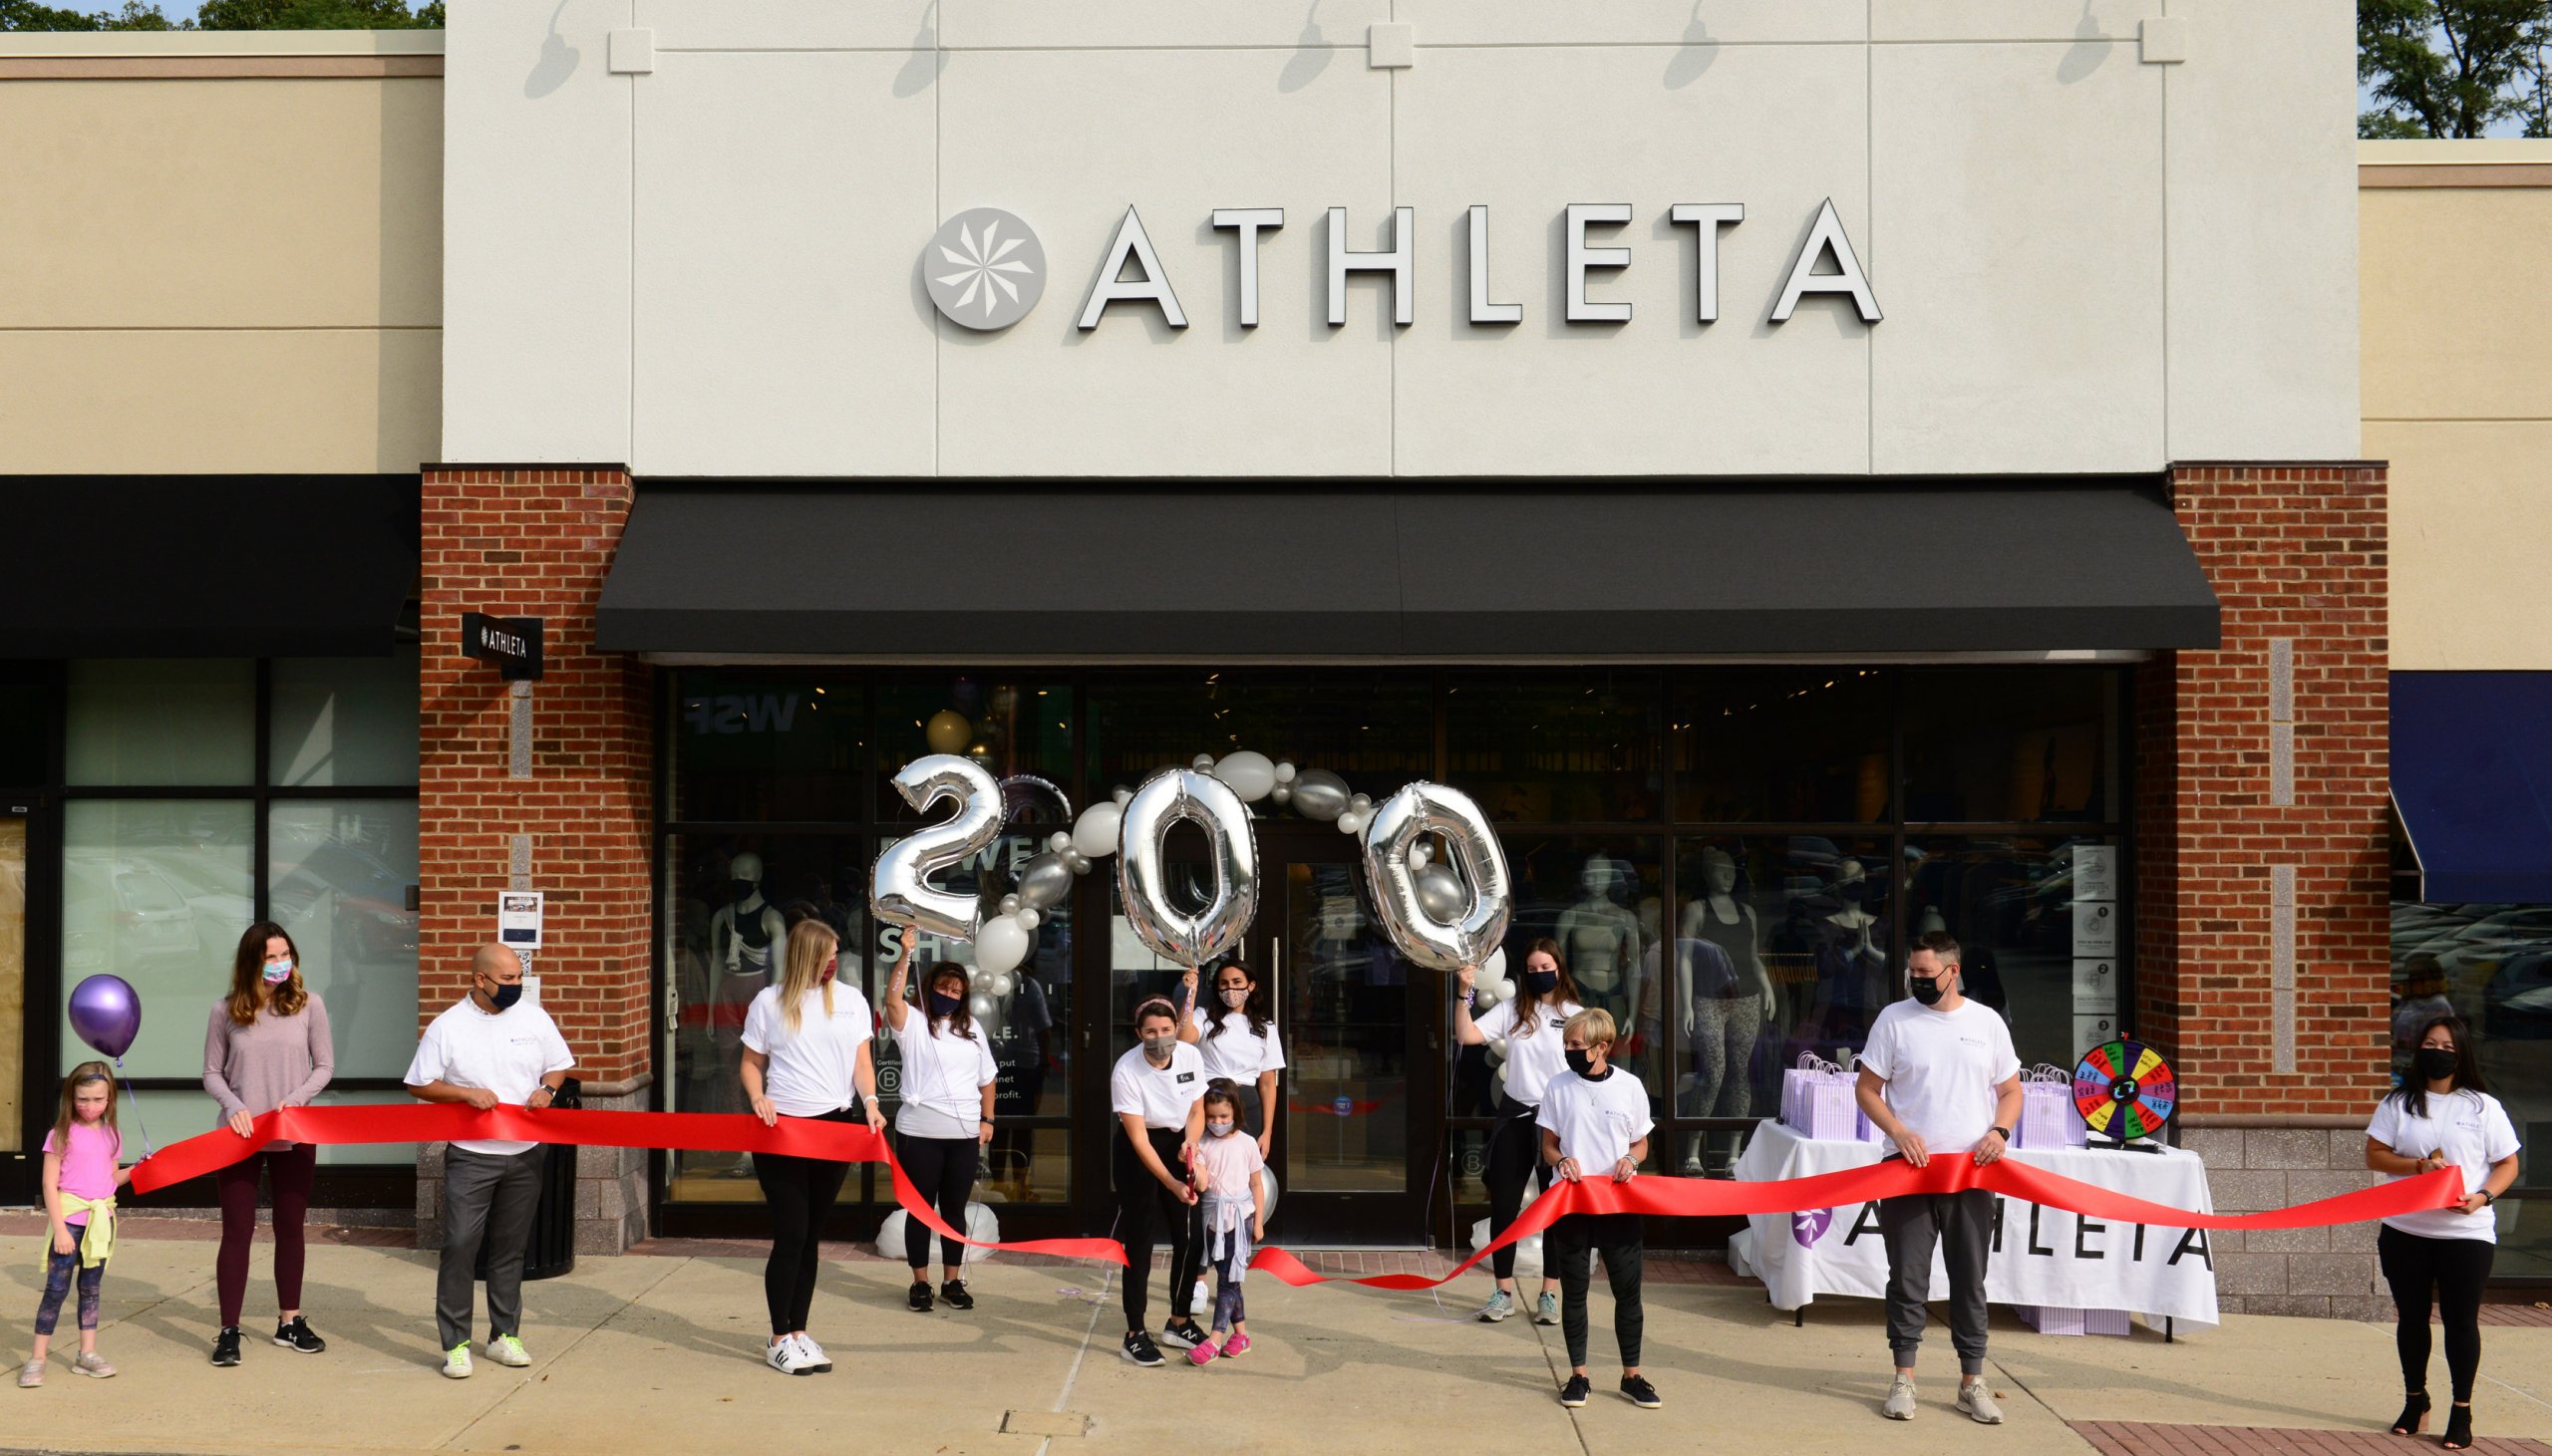 ribbon cutting for athleta store, event photography during covid-19